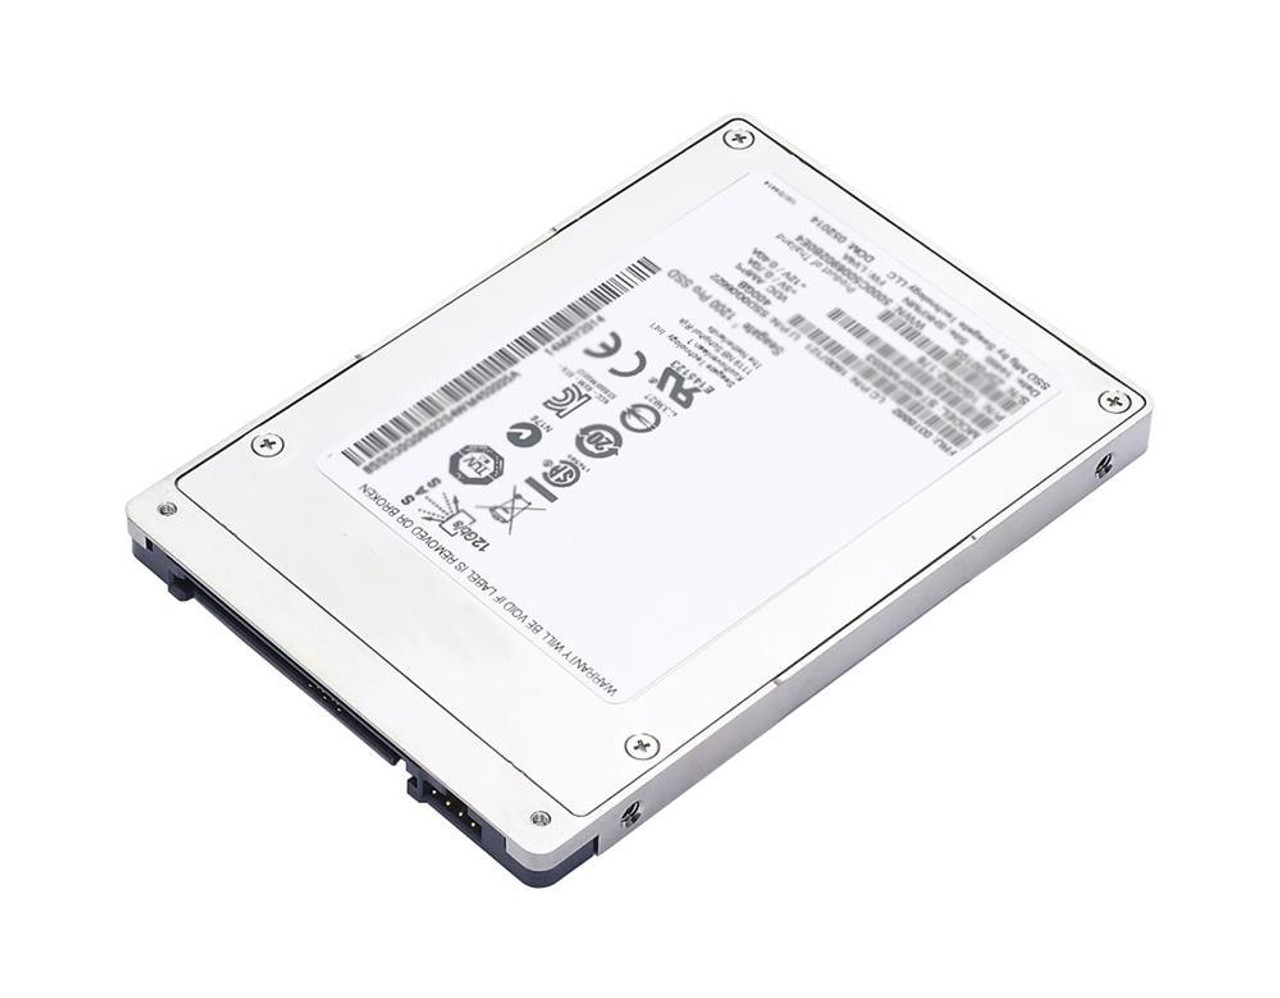 00LY162 IBM 775GB eMLC SAS 12Gbps (4K) 2.5-inch Internal Solid State Drive (SSD) for pSeries Servers